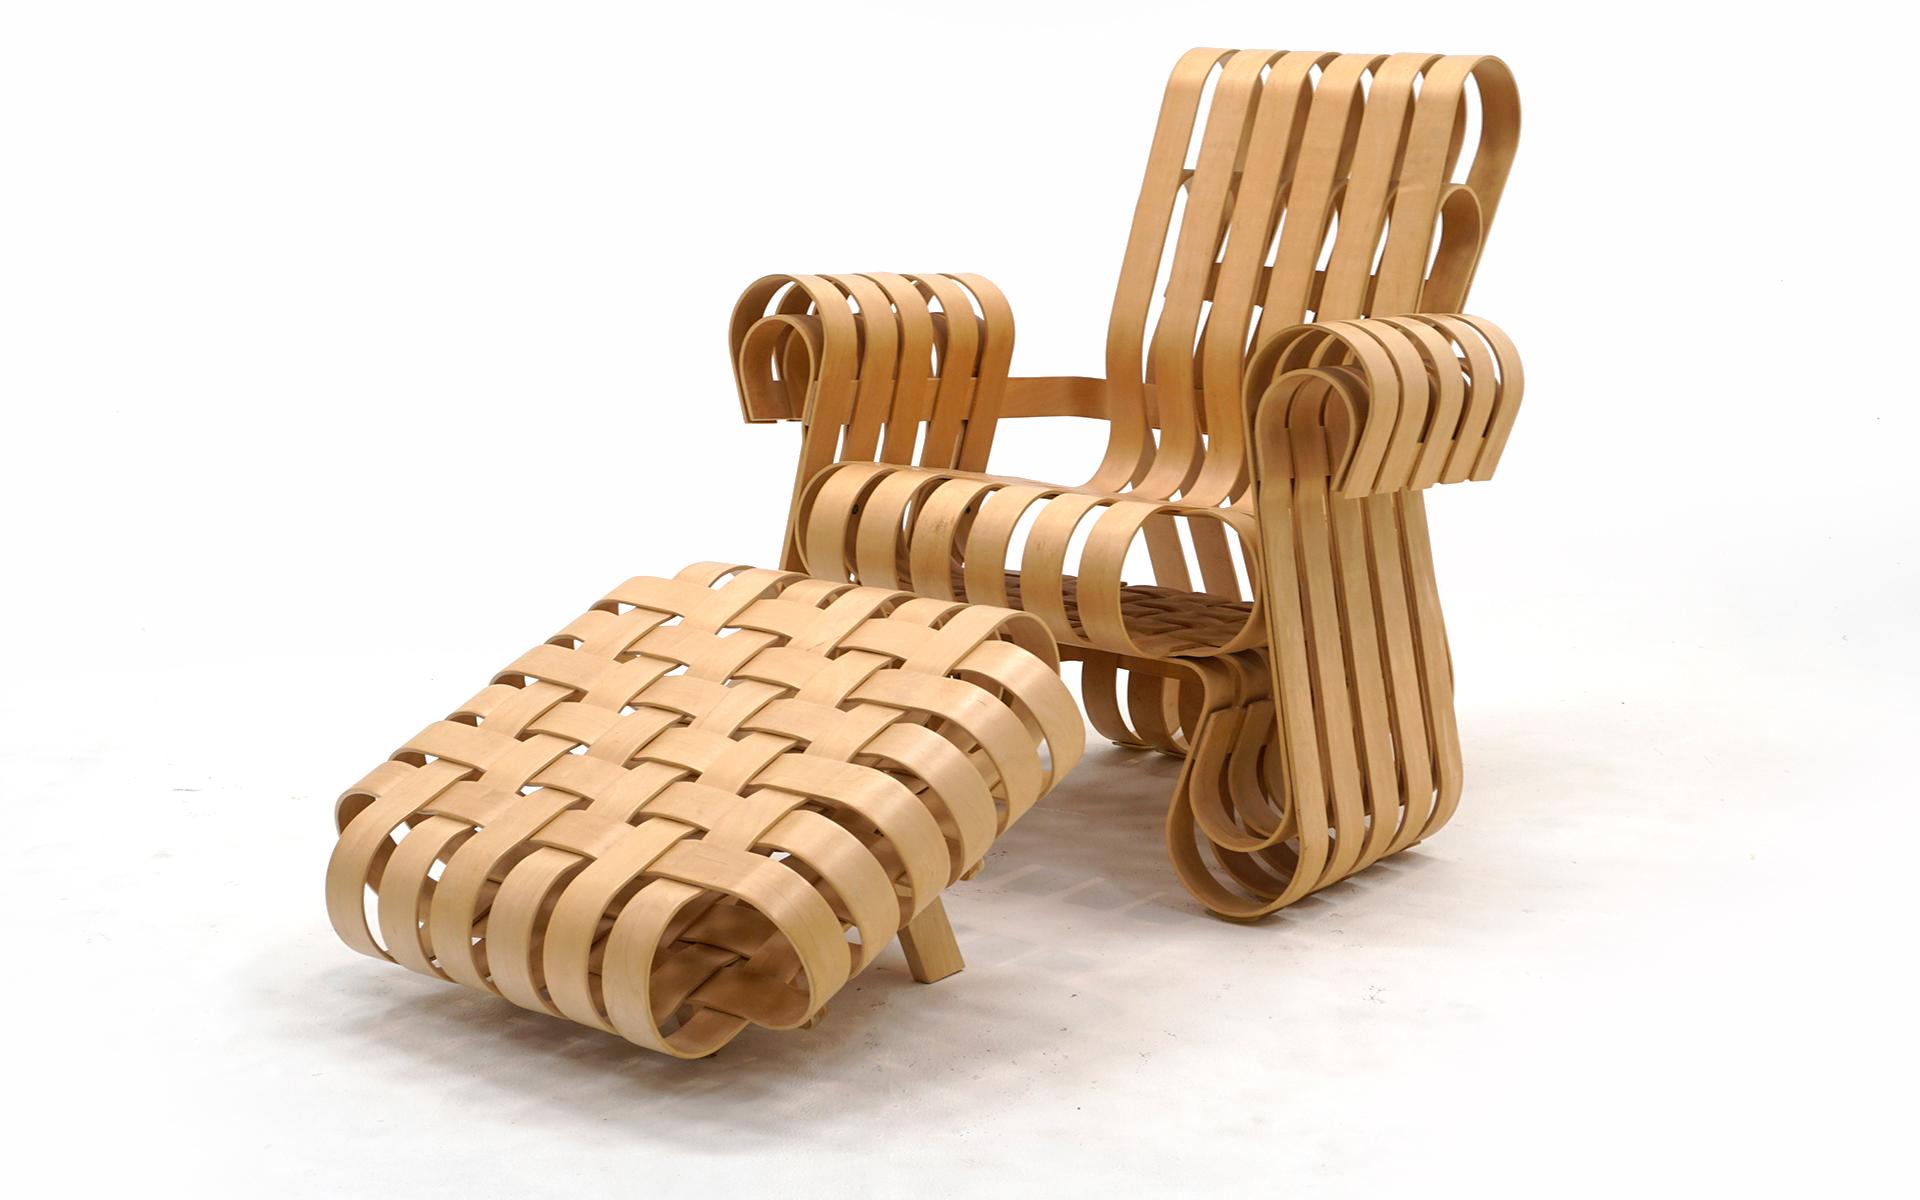 Power play chair and ottoman designed by Frank Gehry for Knoll in very close to new condition. There are no chips, cracks or repairs to the wood slats. Little if any signs of use. This set retails new for $14,000 plus shipping. This is a great